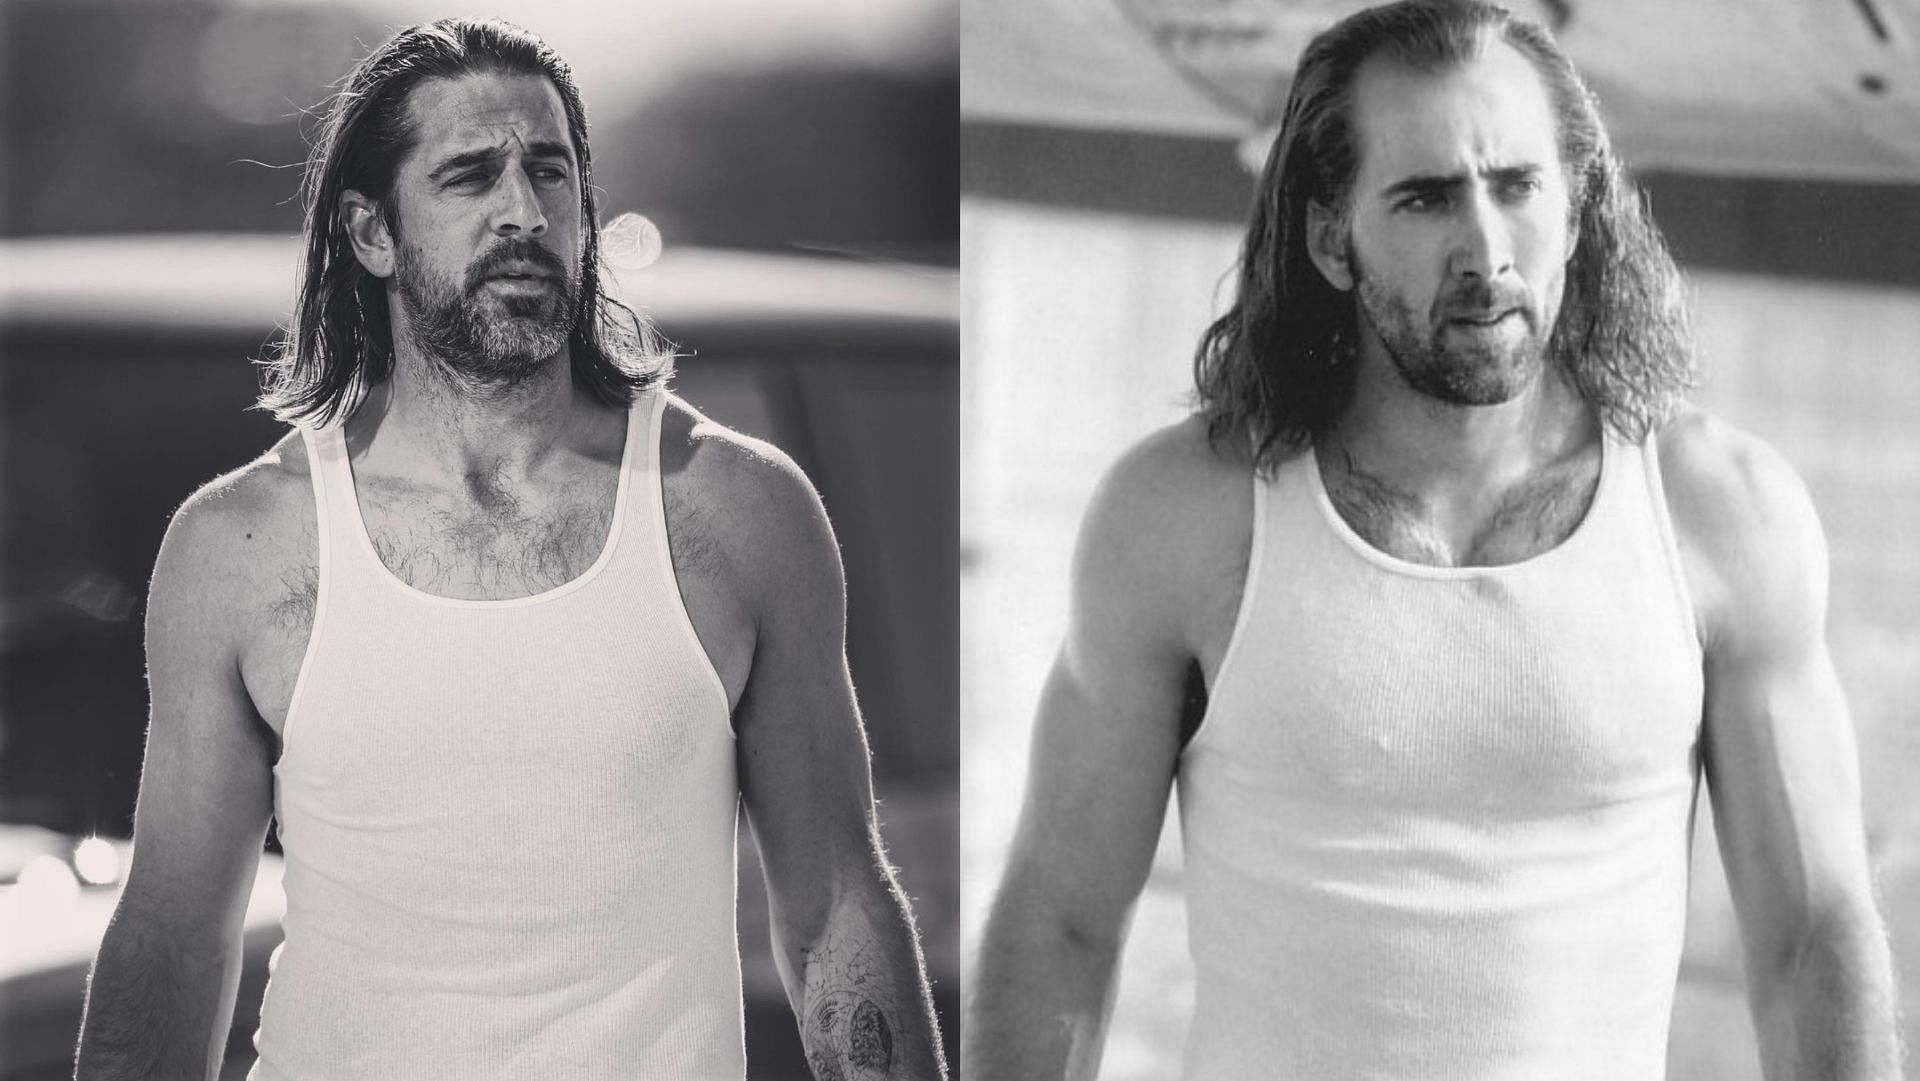 Hilarious Aaron Rodgers x Nicolas Cage memes trend as NFL star's